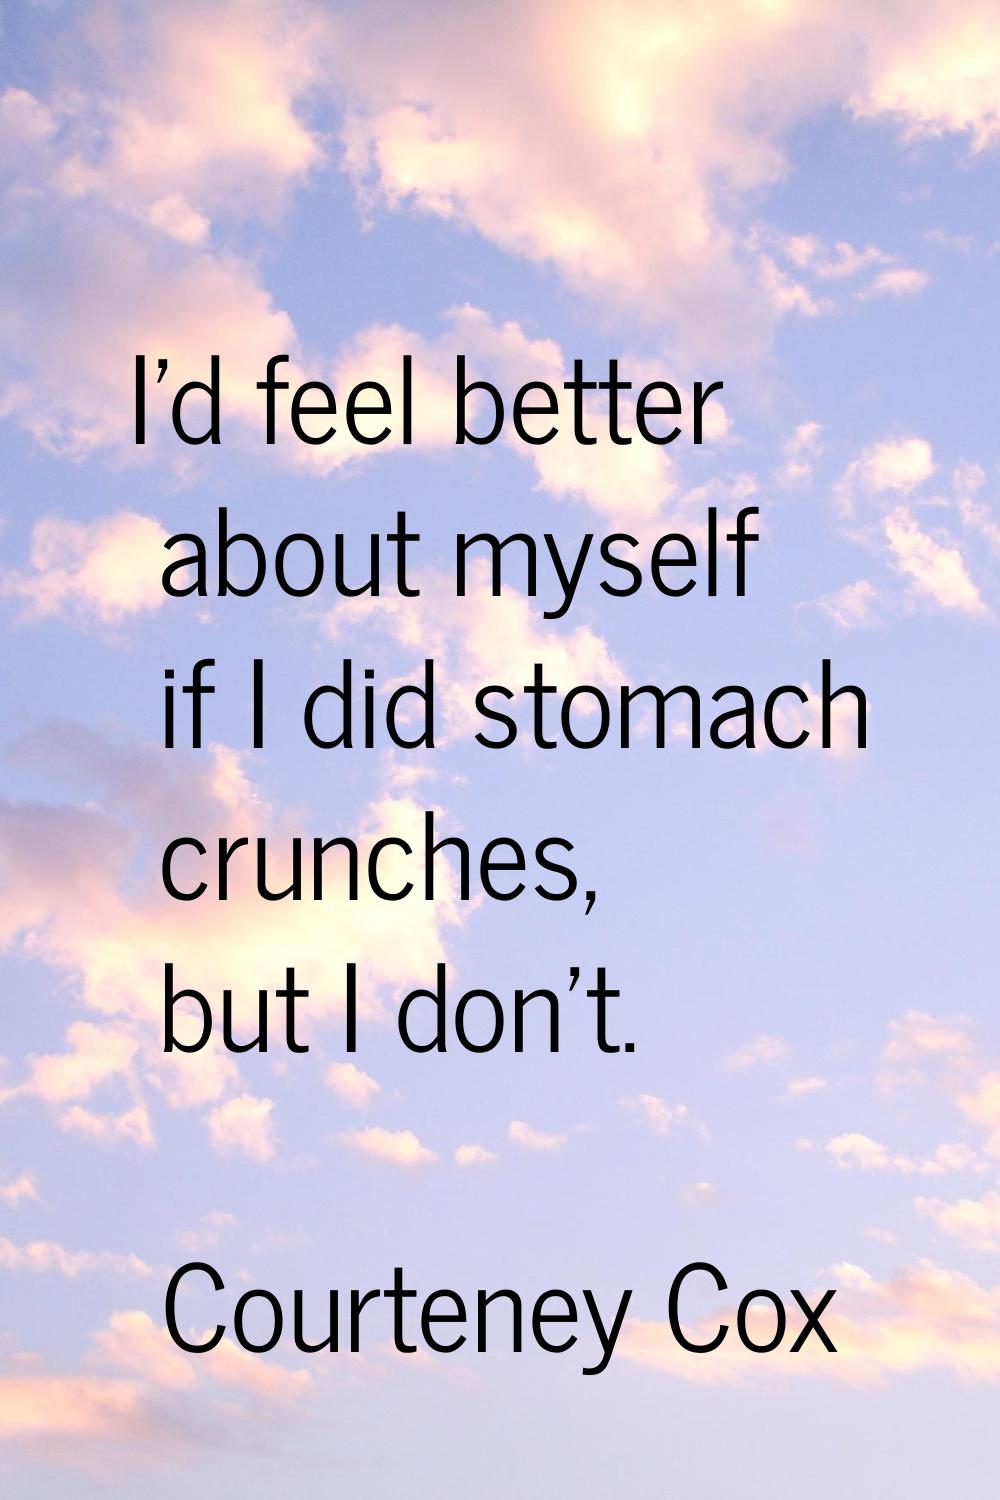 I'd feel better about myself if I did stomach crunches, but I don't.